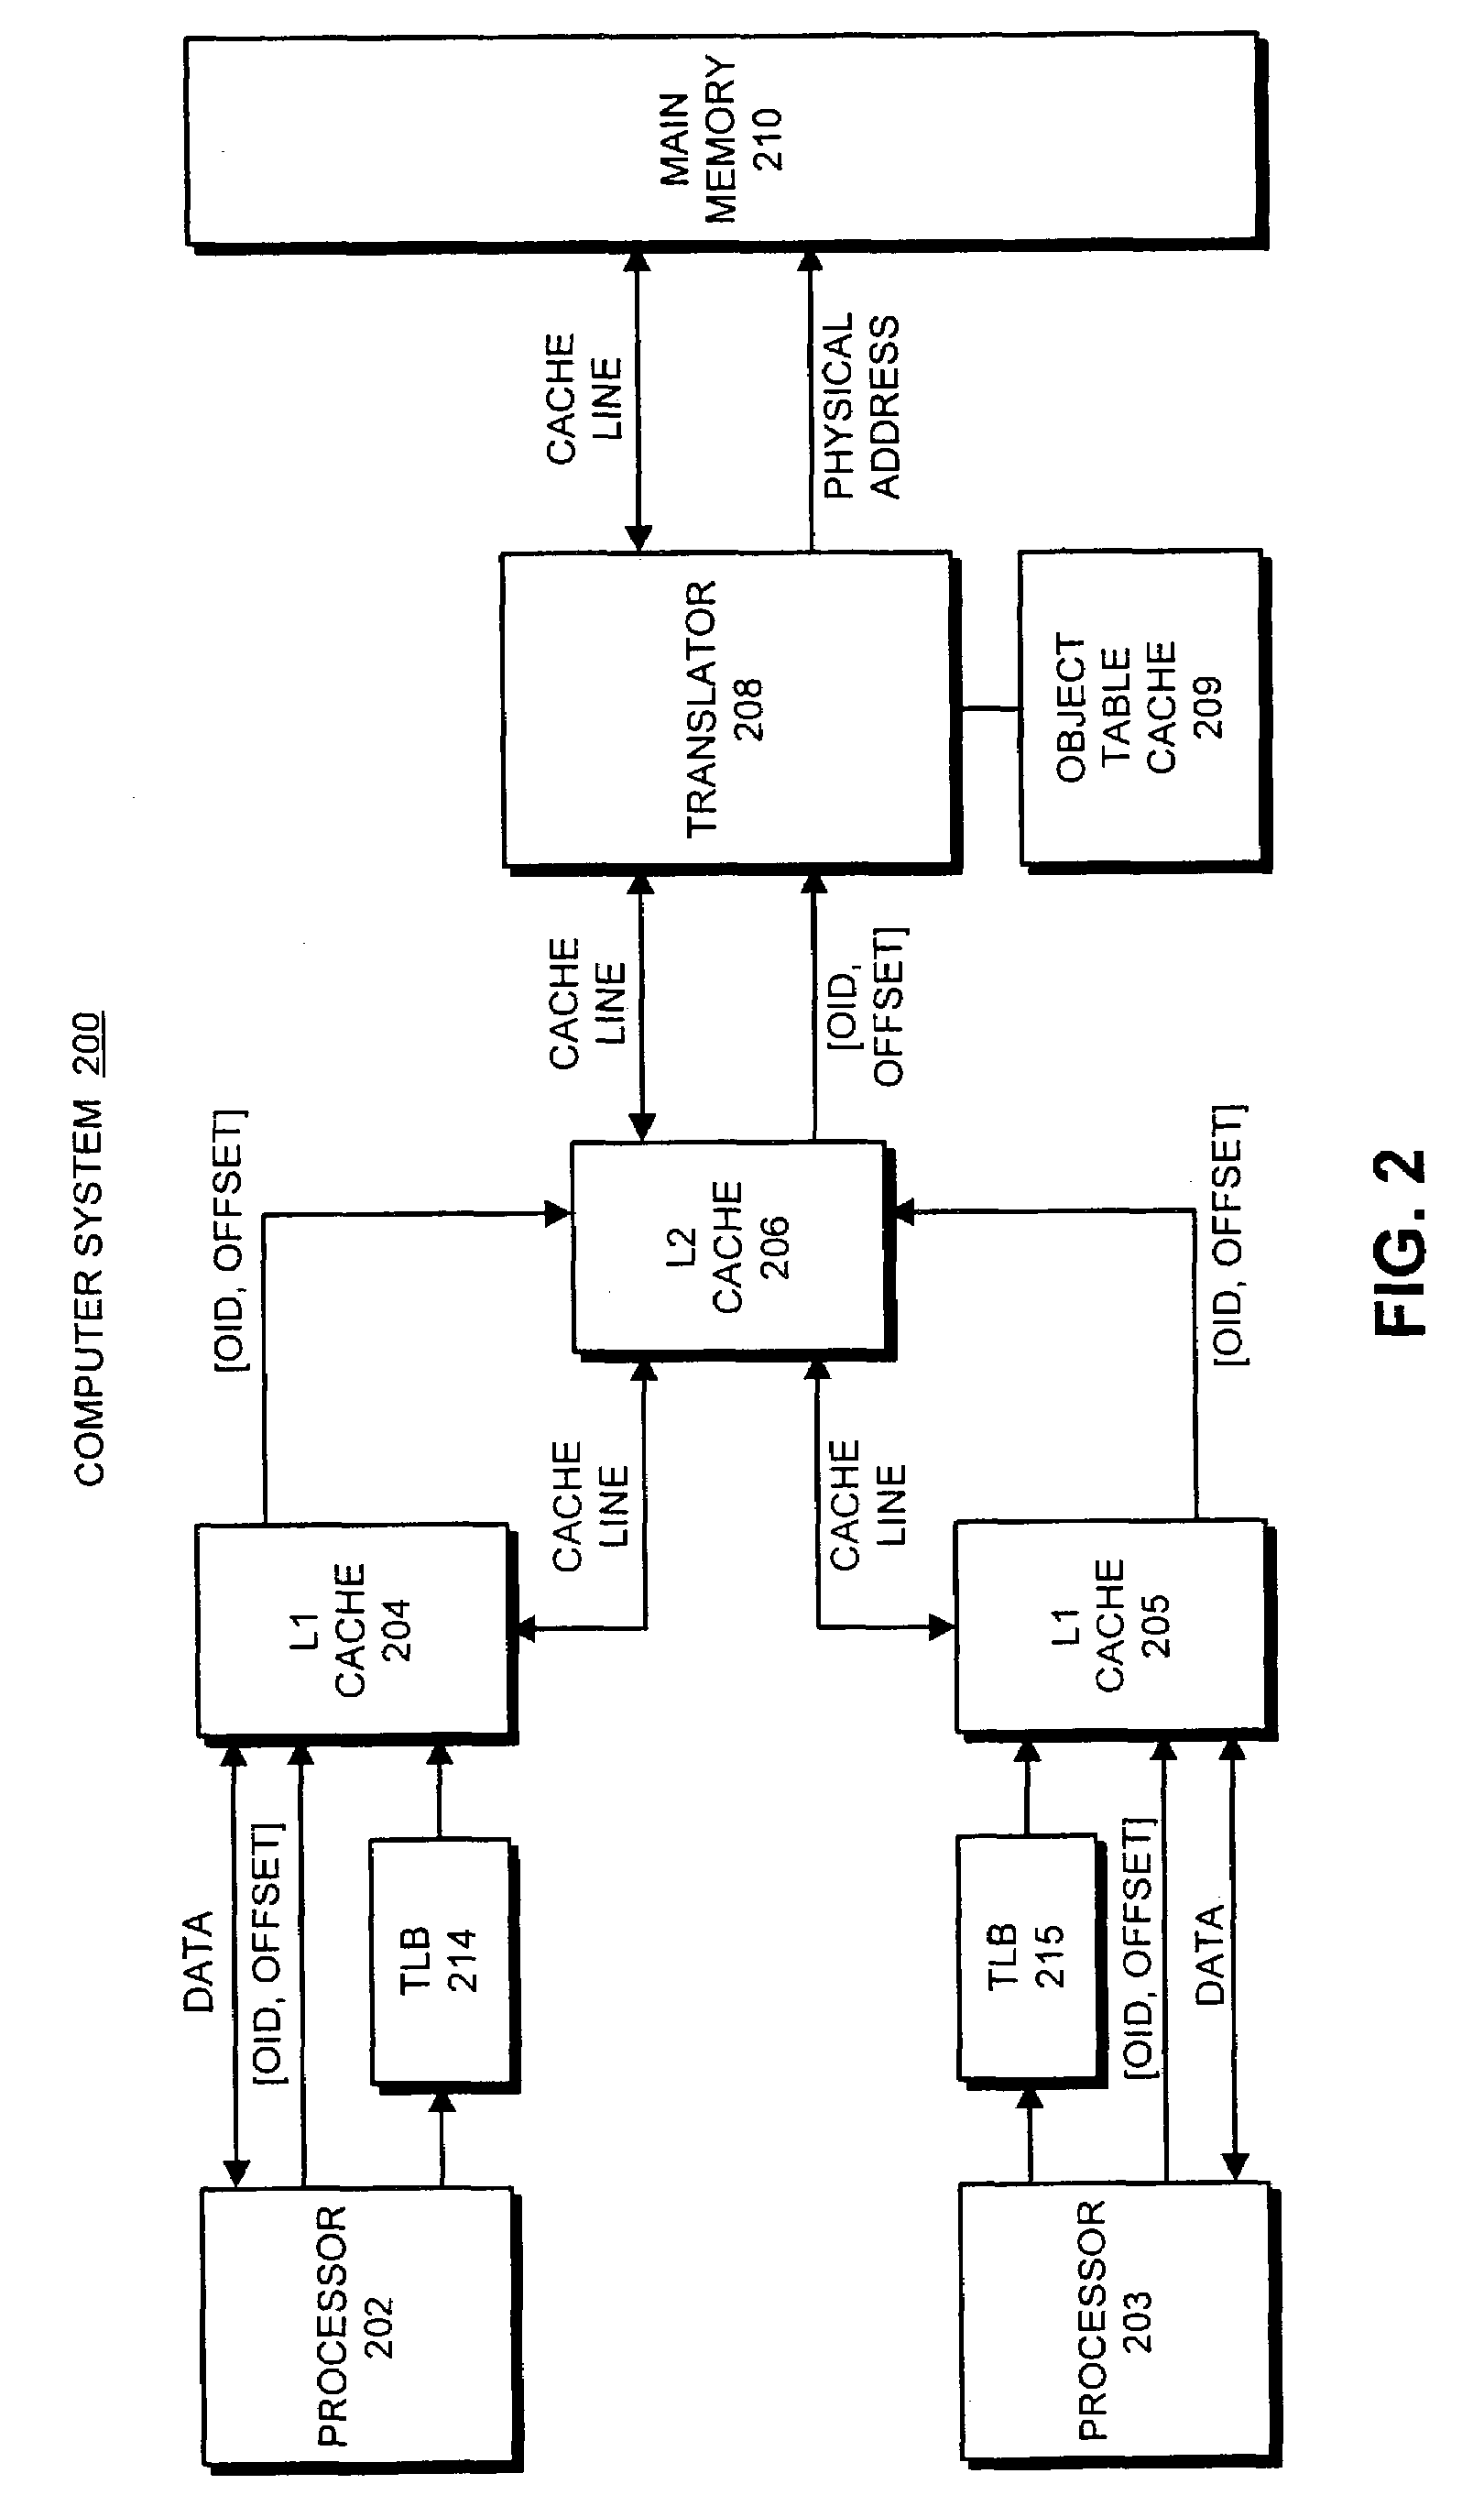 Method and apparatus for skewing a bi-directional object layout to improve cache performance